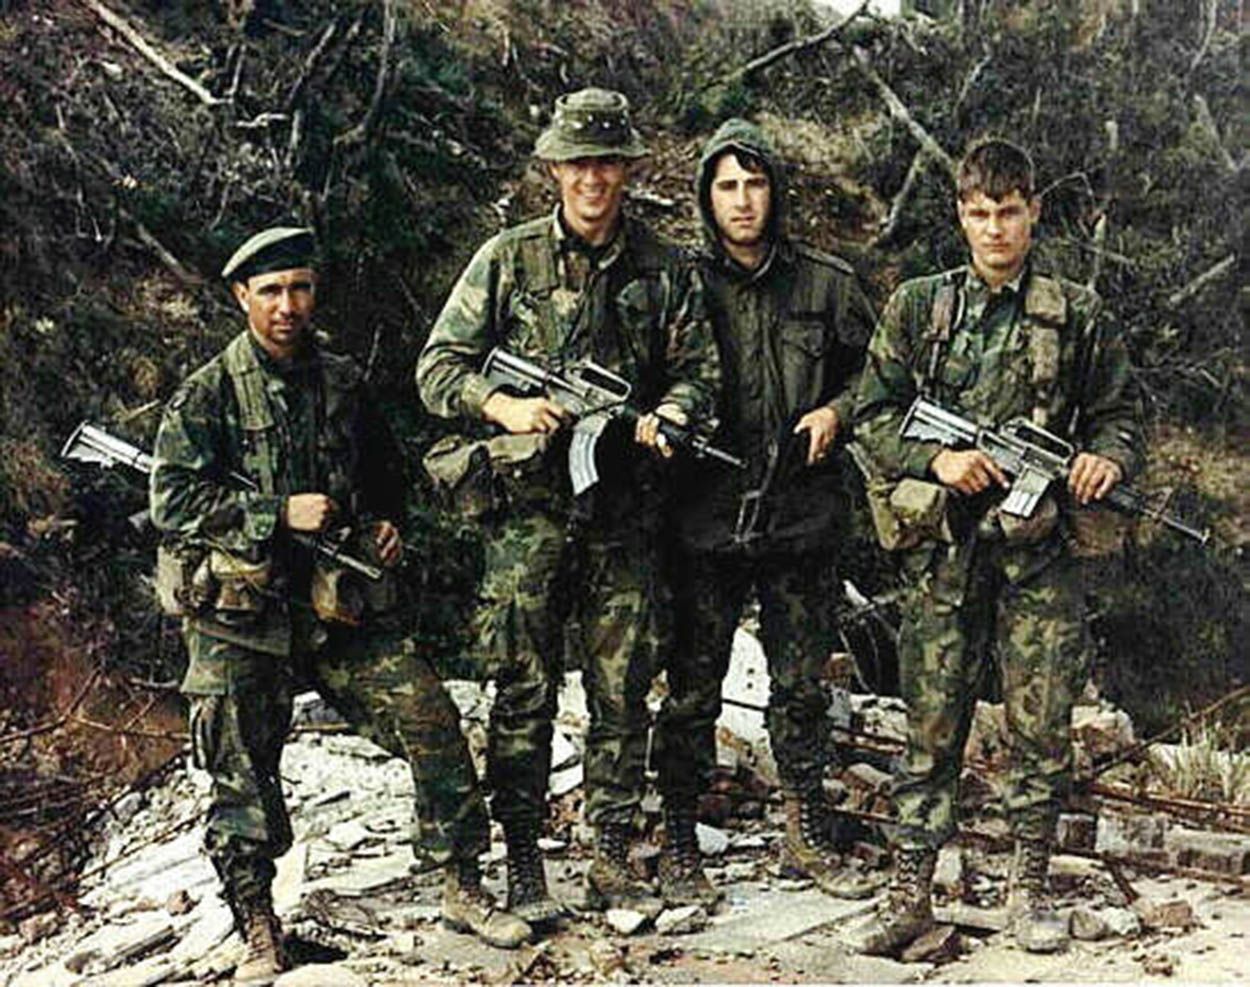 Sweetnam, centre, in his first mission back with the Rangers after being wounded multiple times. Dec. 28, 1970.